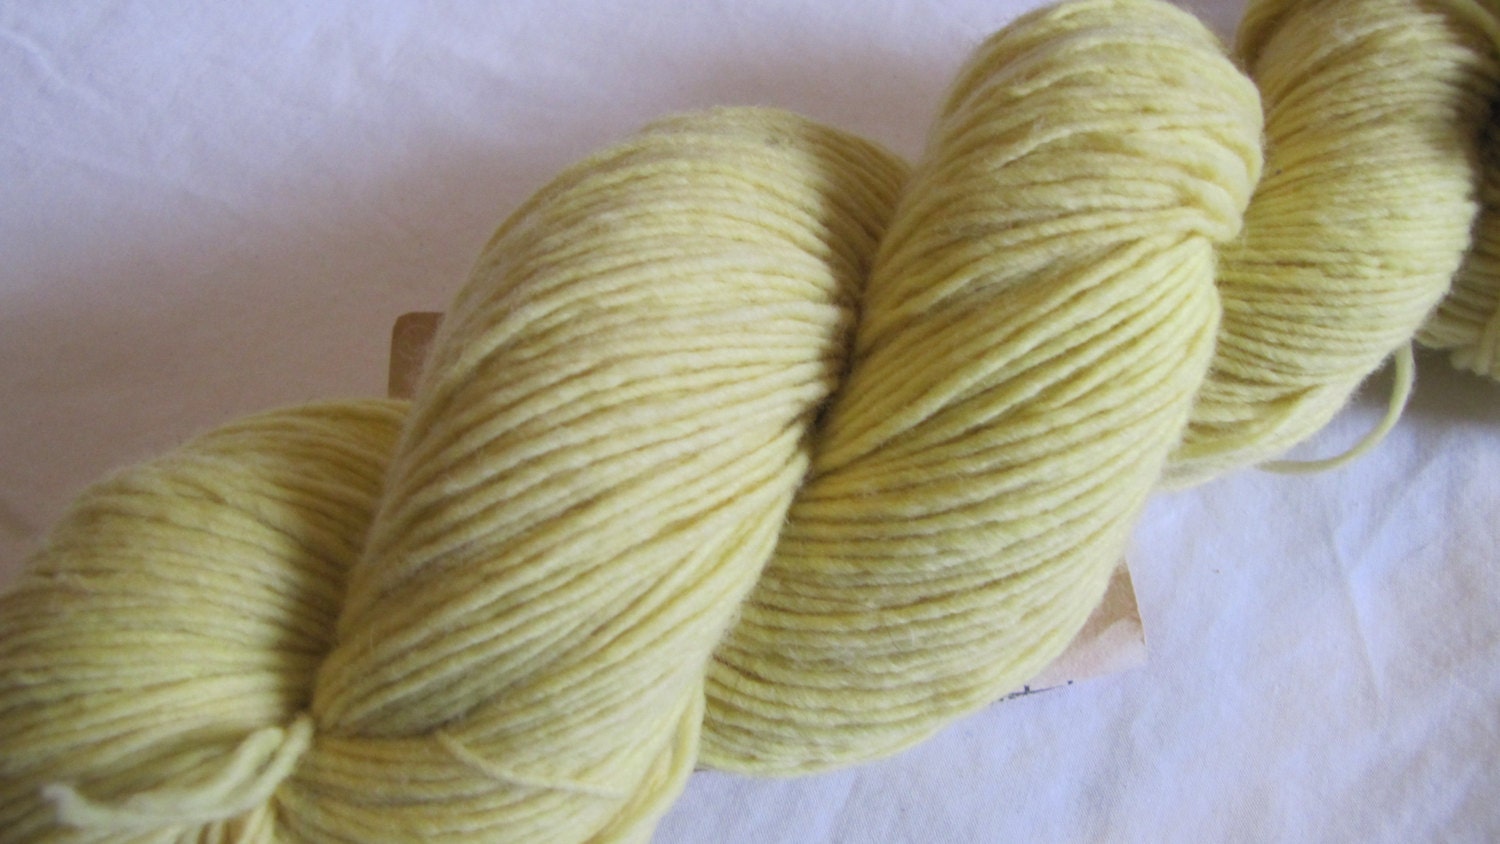 Weld Naturally Plant Dyed Merino Wool Yarn - Fingering Weight - 420 yards - M-16 - EscapeToEvermore